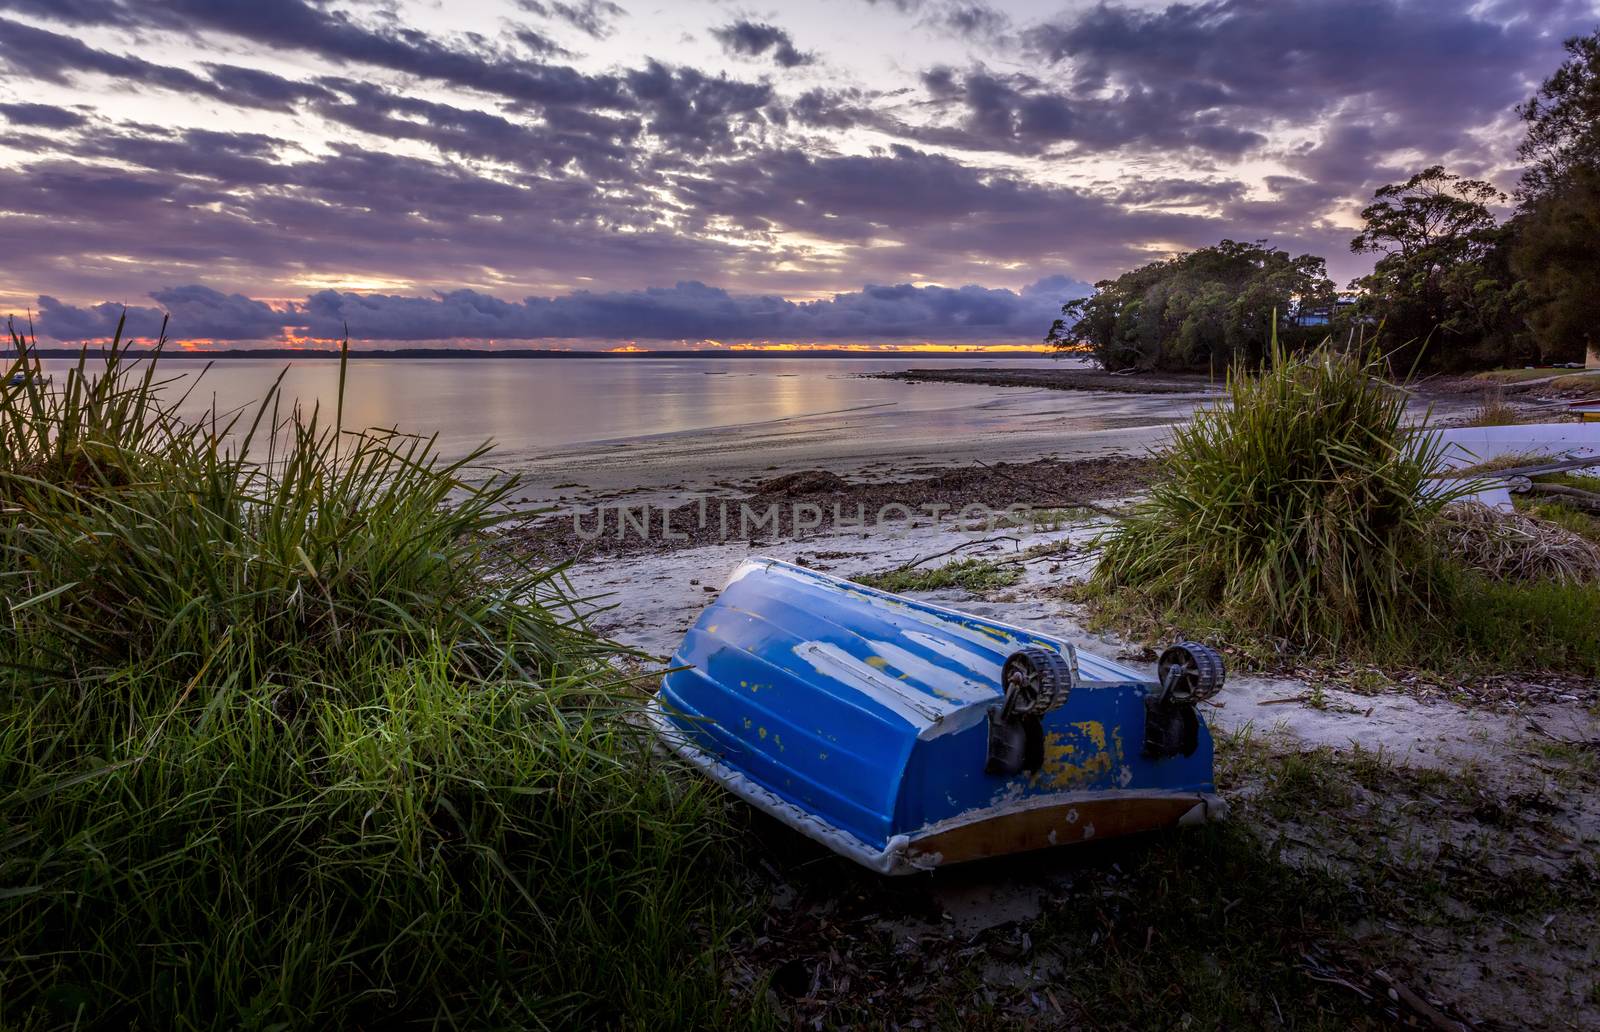 Little blue rowboat, sometimes called "tinnies" in Australia sits upturned on a beach at dawn with the sky aglow with the first colours of morning